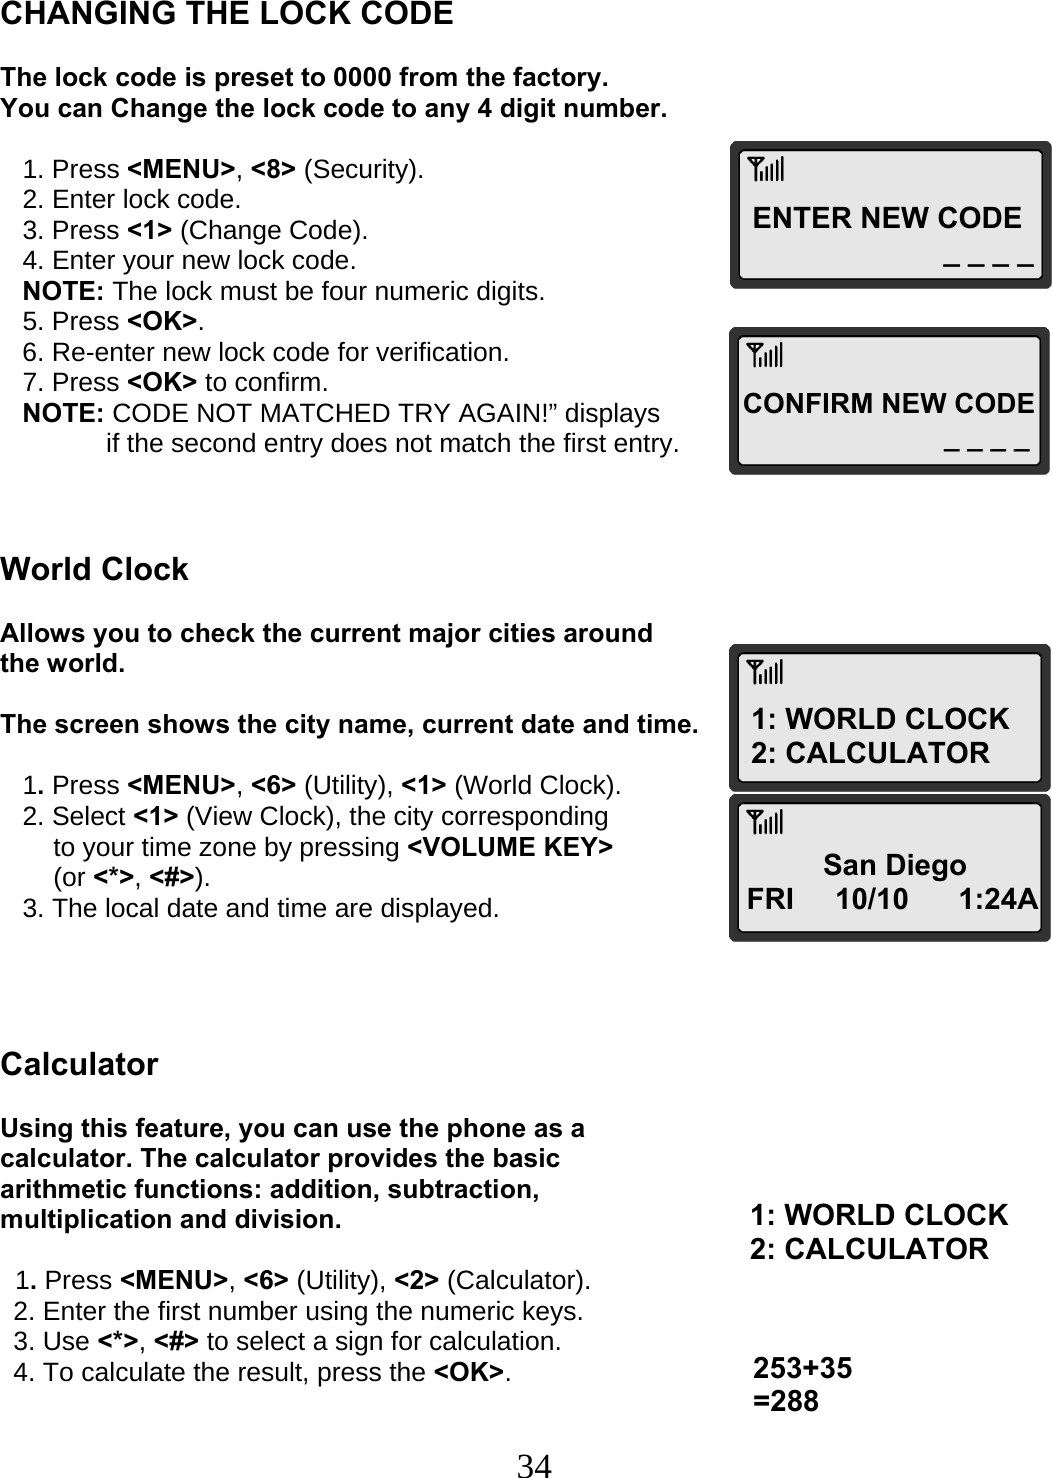  34ENTER NEW CODE _ _ _ _ CONFIRM NEW CODE _ _ _ _1: WORLD CLOCK 2: CALCULATOR San Diego FRI     10/10      1:24A253+35 =288 1: WORLD CLOCK 2: CALCULATOR   CHANGING THE LOCK CODE  The lock code is preset to 0000 from the factory.  You can Change the lock code to any 4 digit number.     1. Press &lt;MENU&gt;, &lt;8&gt; (Security).    2. Enter lock code.    3. Press &lt;1&gt; (Change Code).    4. Enter your new lock code.    NOTE: The lock must be four numeric digits.    5. Press &lt;OK&gt;.    6. Re-enter new lock code for verification.    7. Press &lt;OK&gt; to confirm.    NOTE: CODE NOT MATCHED TRY AGAIN!” displays   if the second entry does not match the first entry.    World Clock  Allows you to check the current major cities around the world.  The screen shows the city name, current date and time.     1. Press &lt;MENU&gt;, &lt;6&gt; (Utility), &lt;1&gt; (World Clock).    2. Select &lt;1&gt; (View Clock), the city corresponding  to your time zone by pressing &lt;VOLUME KEY&gt; (or &lt;*&gt;, &lt;#&gt;).    3. The local date and time are displayed.     Calculator  Using this feature, you can use the phone as a calculator. The calculator provides the basic arithmetic functions: addition, subtraction, multiplication and division.    1. Press &lt;MENU&gt;, &lt;6&gt; (Utility), &lt;2&gt; (Calculator). 2. Enter the first number using the numeric keys. 3. Use &lt;*&gt;, &lt;#&gt; to select a sign for calculation. 4. To calculate the result, press the &lt;OK&gt;.   